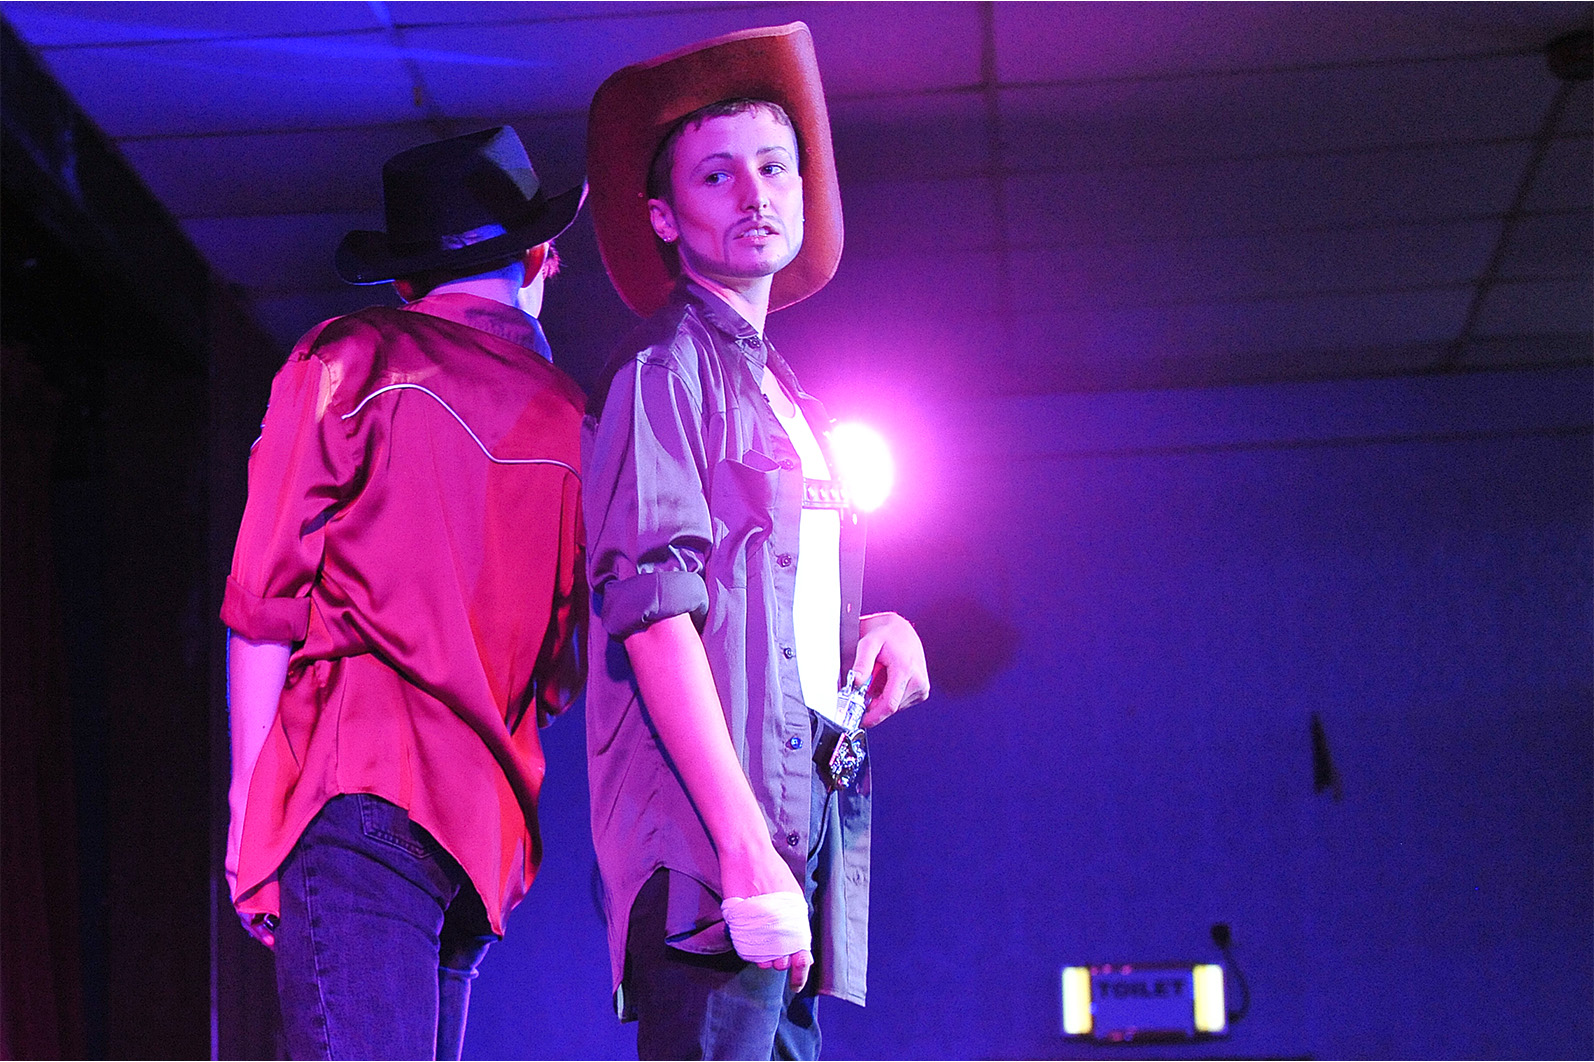 Two slim, white drag kings dressed like cowboys with cowboy hats and shirts, stand back to back on a stage. They are lip syncing and lit by blue, red and purple lighting.